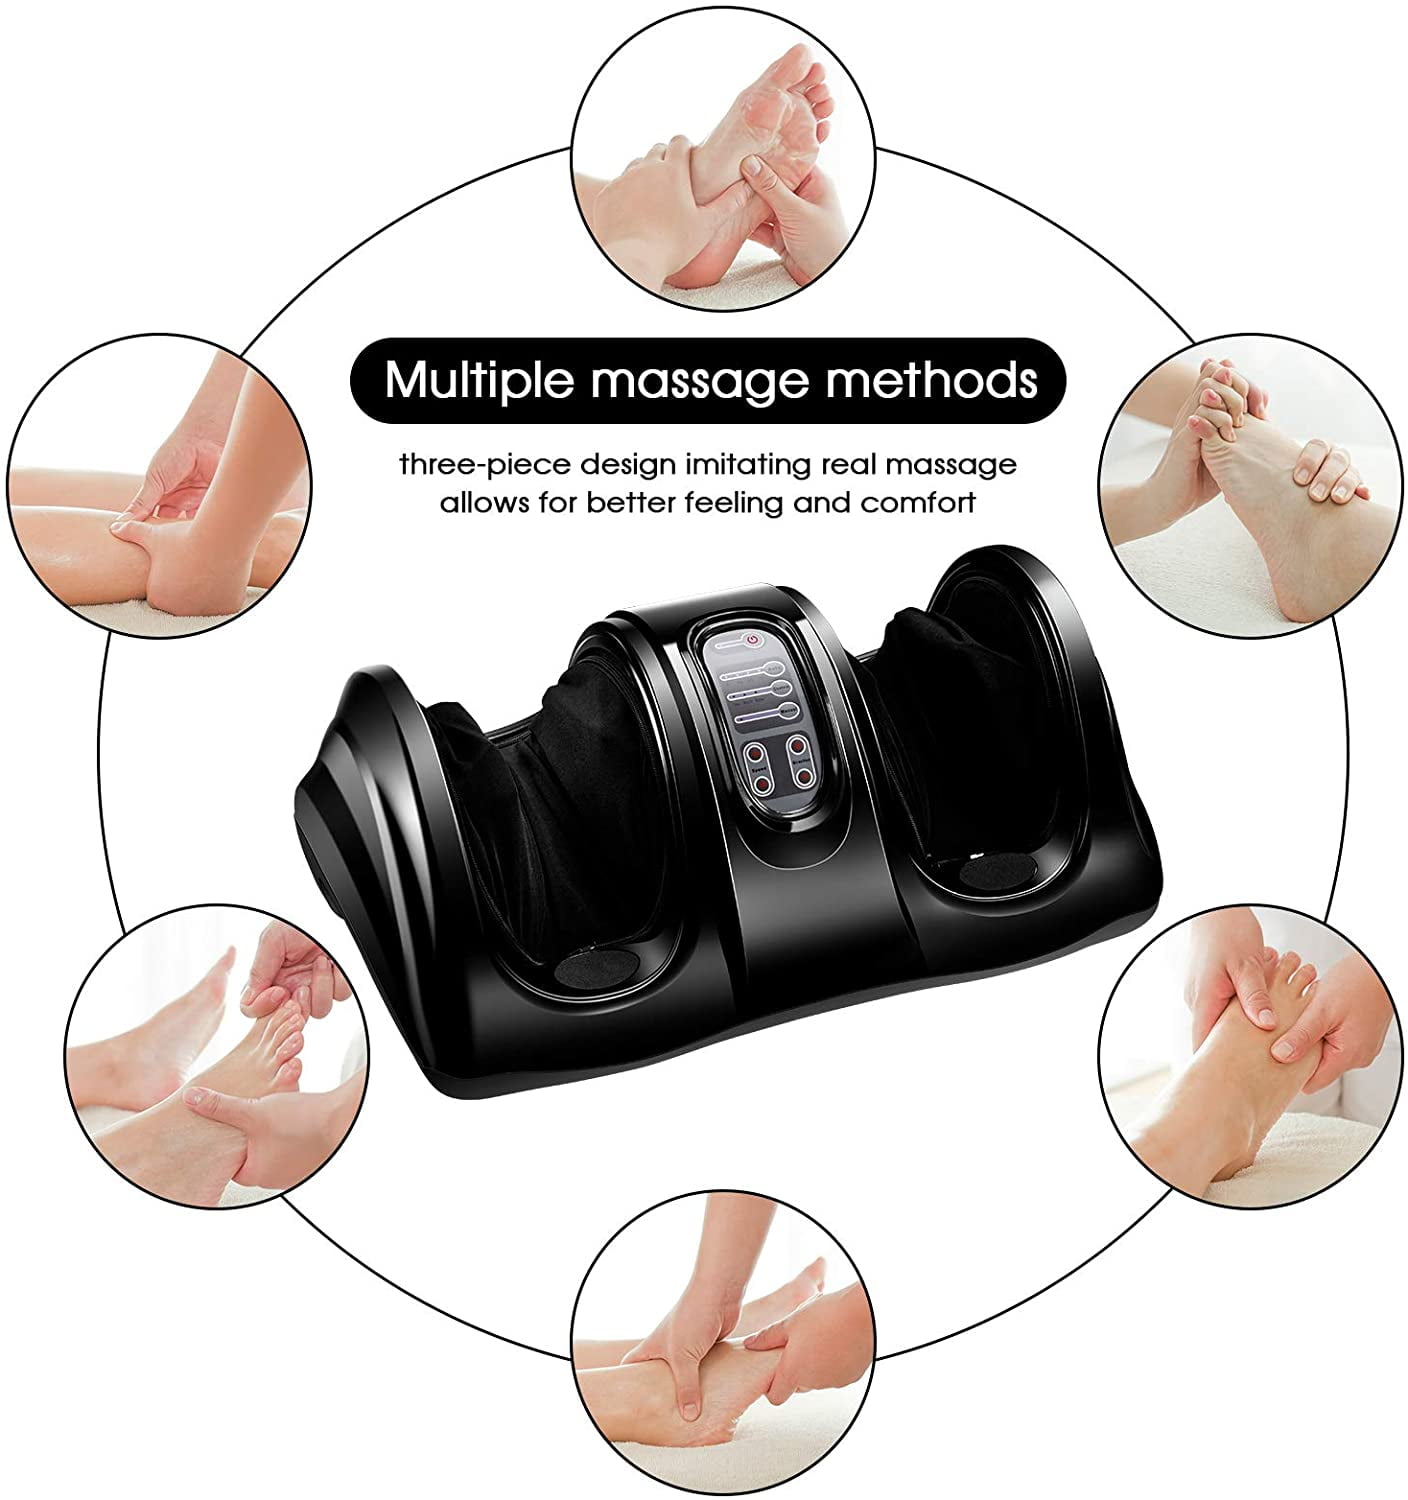 Barton #5 Speed Setting Shiatsu Kneading Rolling Foot Forearm Leg and Calf Massager w/Heating and Remote, Pink